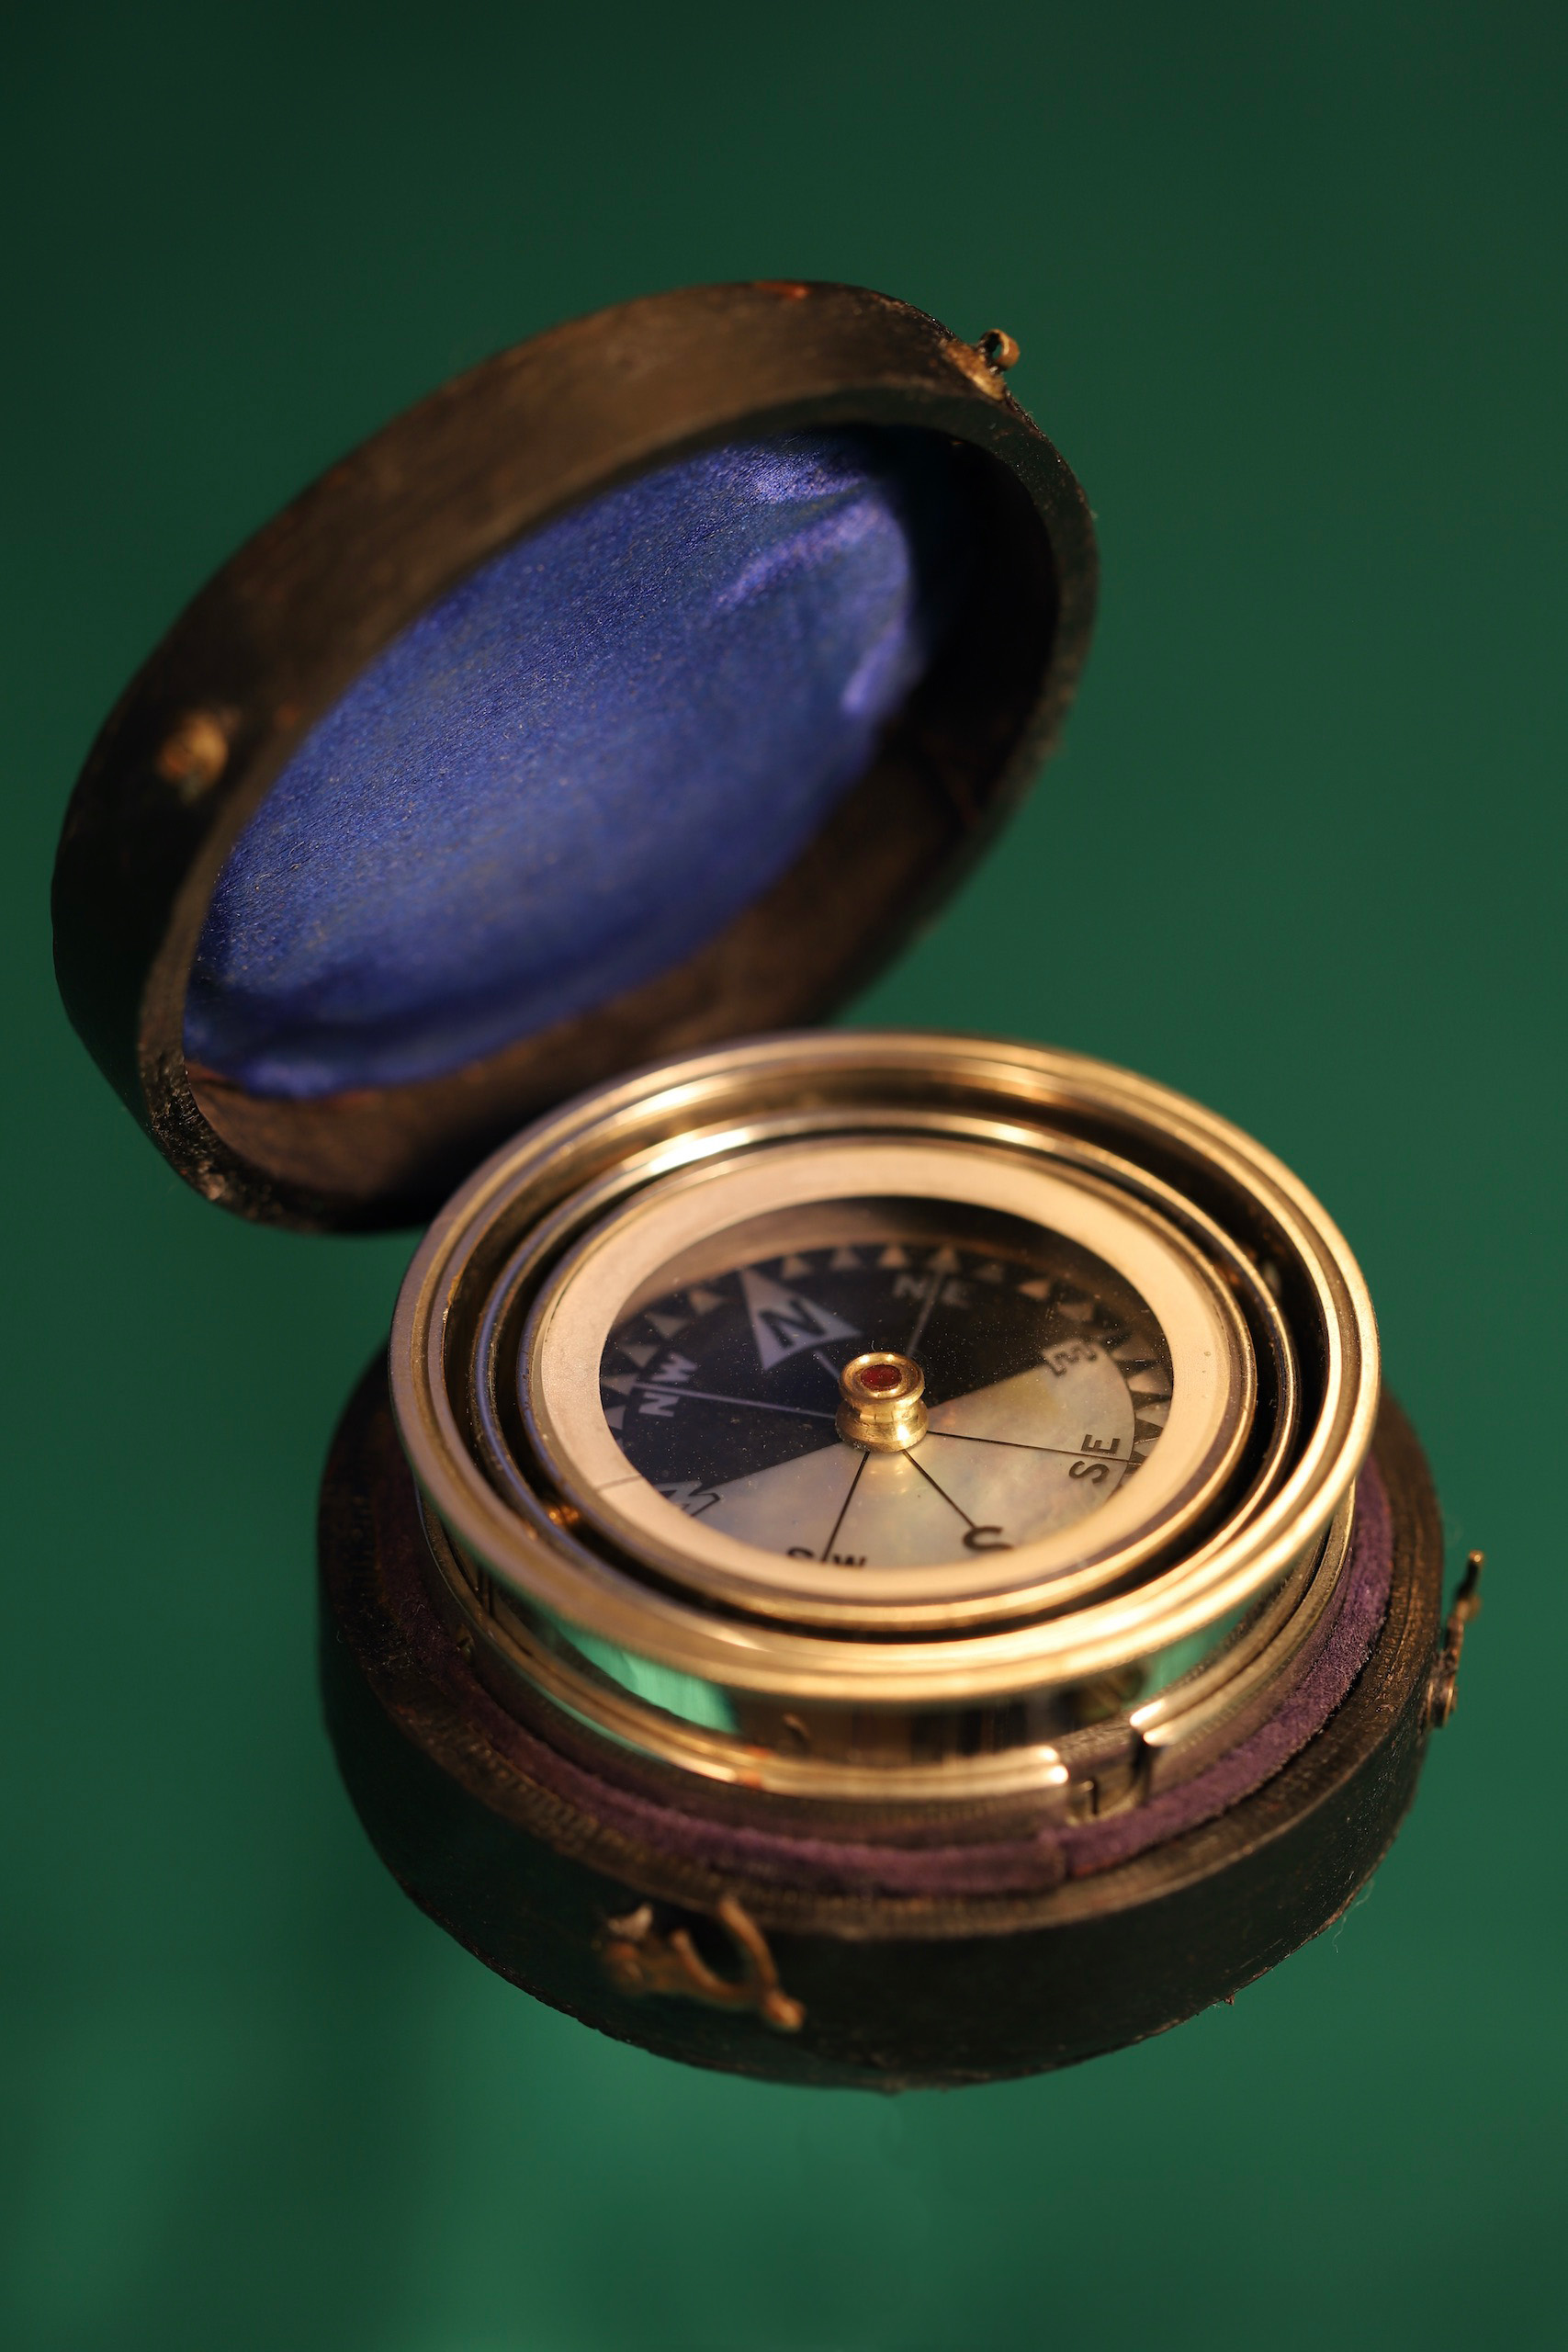 Main image of gimballed compass showing the compass part extended out of its case